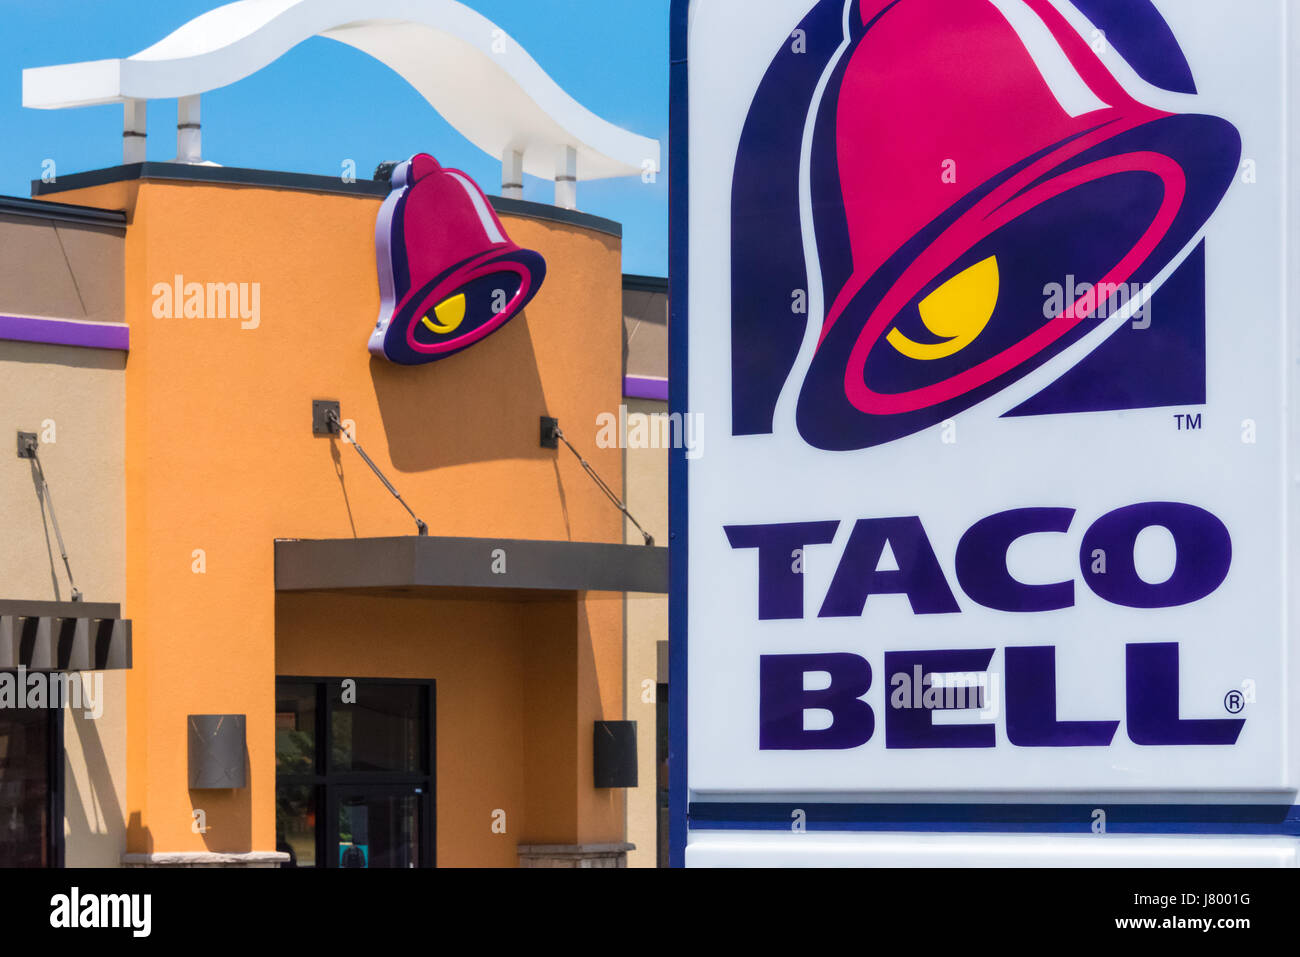 Taco Bell fast food restaurant. Stock Photo